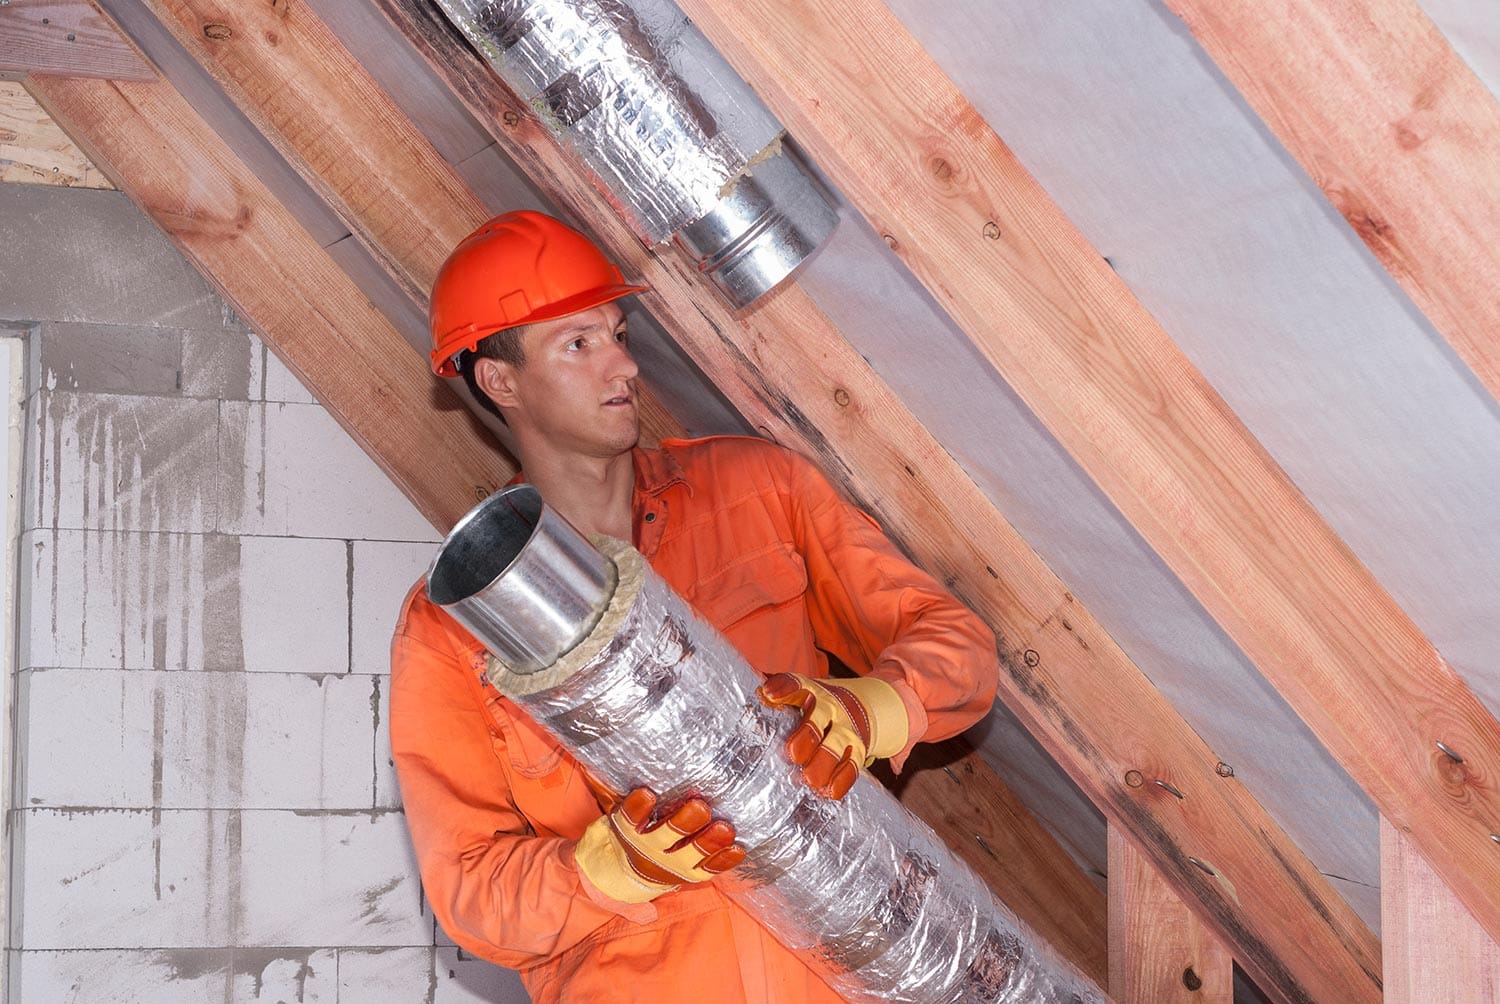 Worker in the attic connects metal air ducts